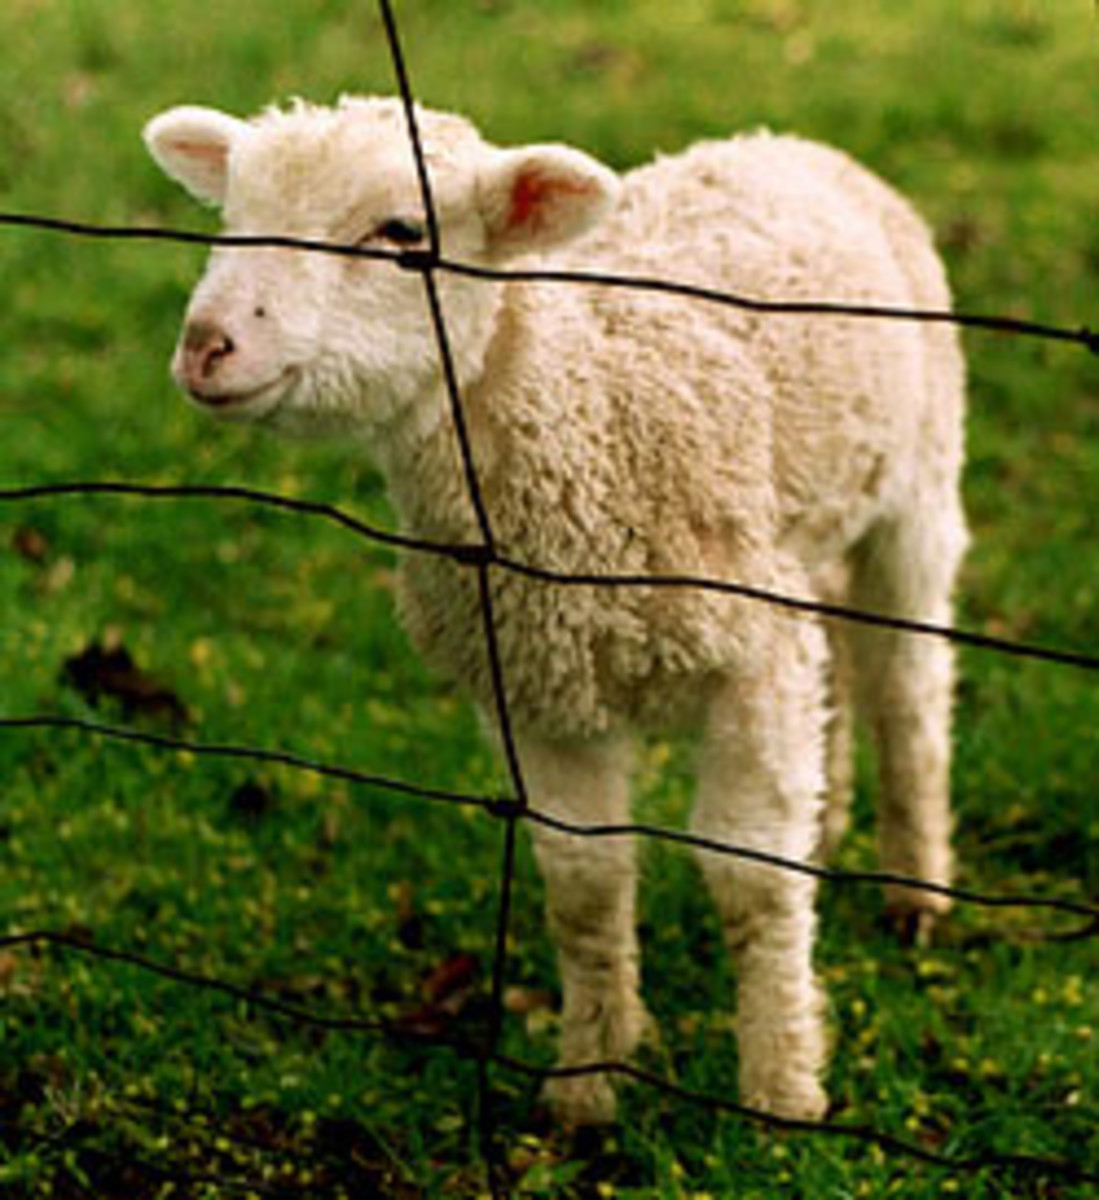 Newbie writers all too often act like sheep and follow every suggestion the read in the hopes of having others read their works.